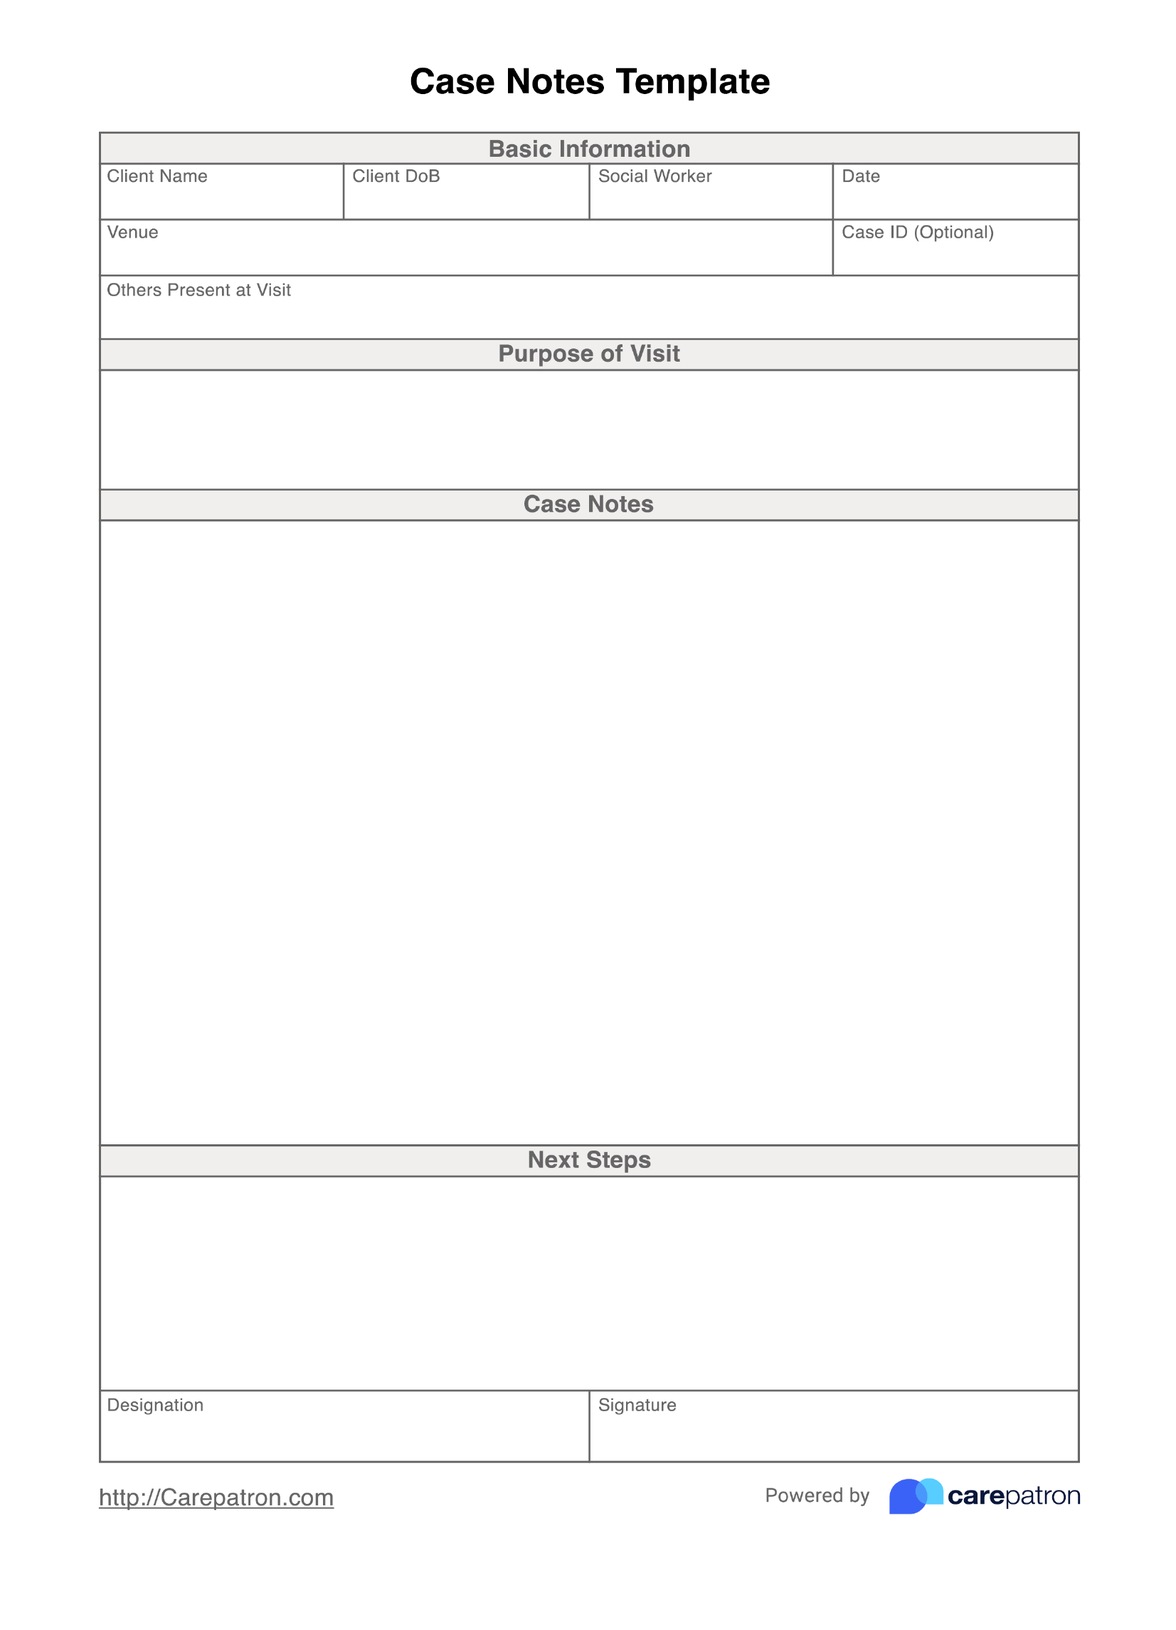 Case Notes Template PDF Example